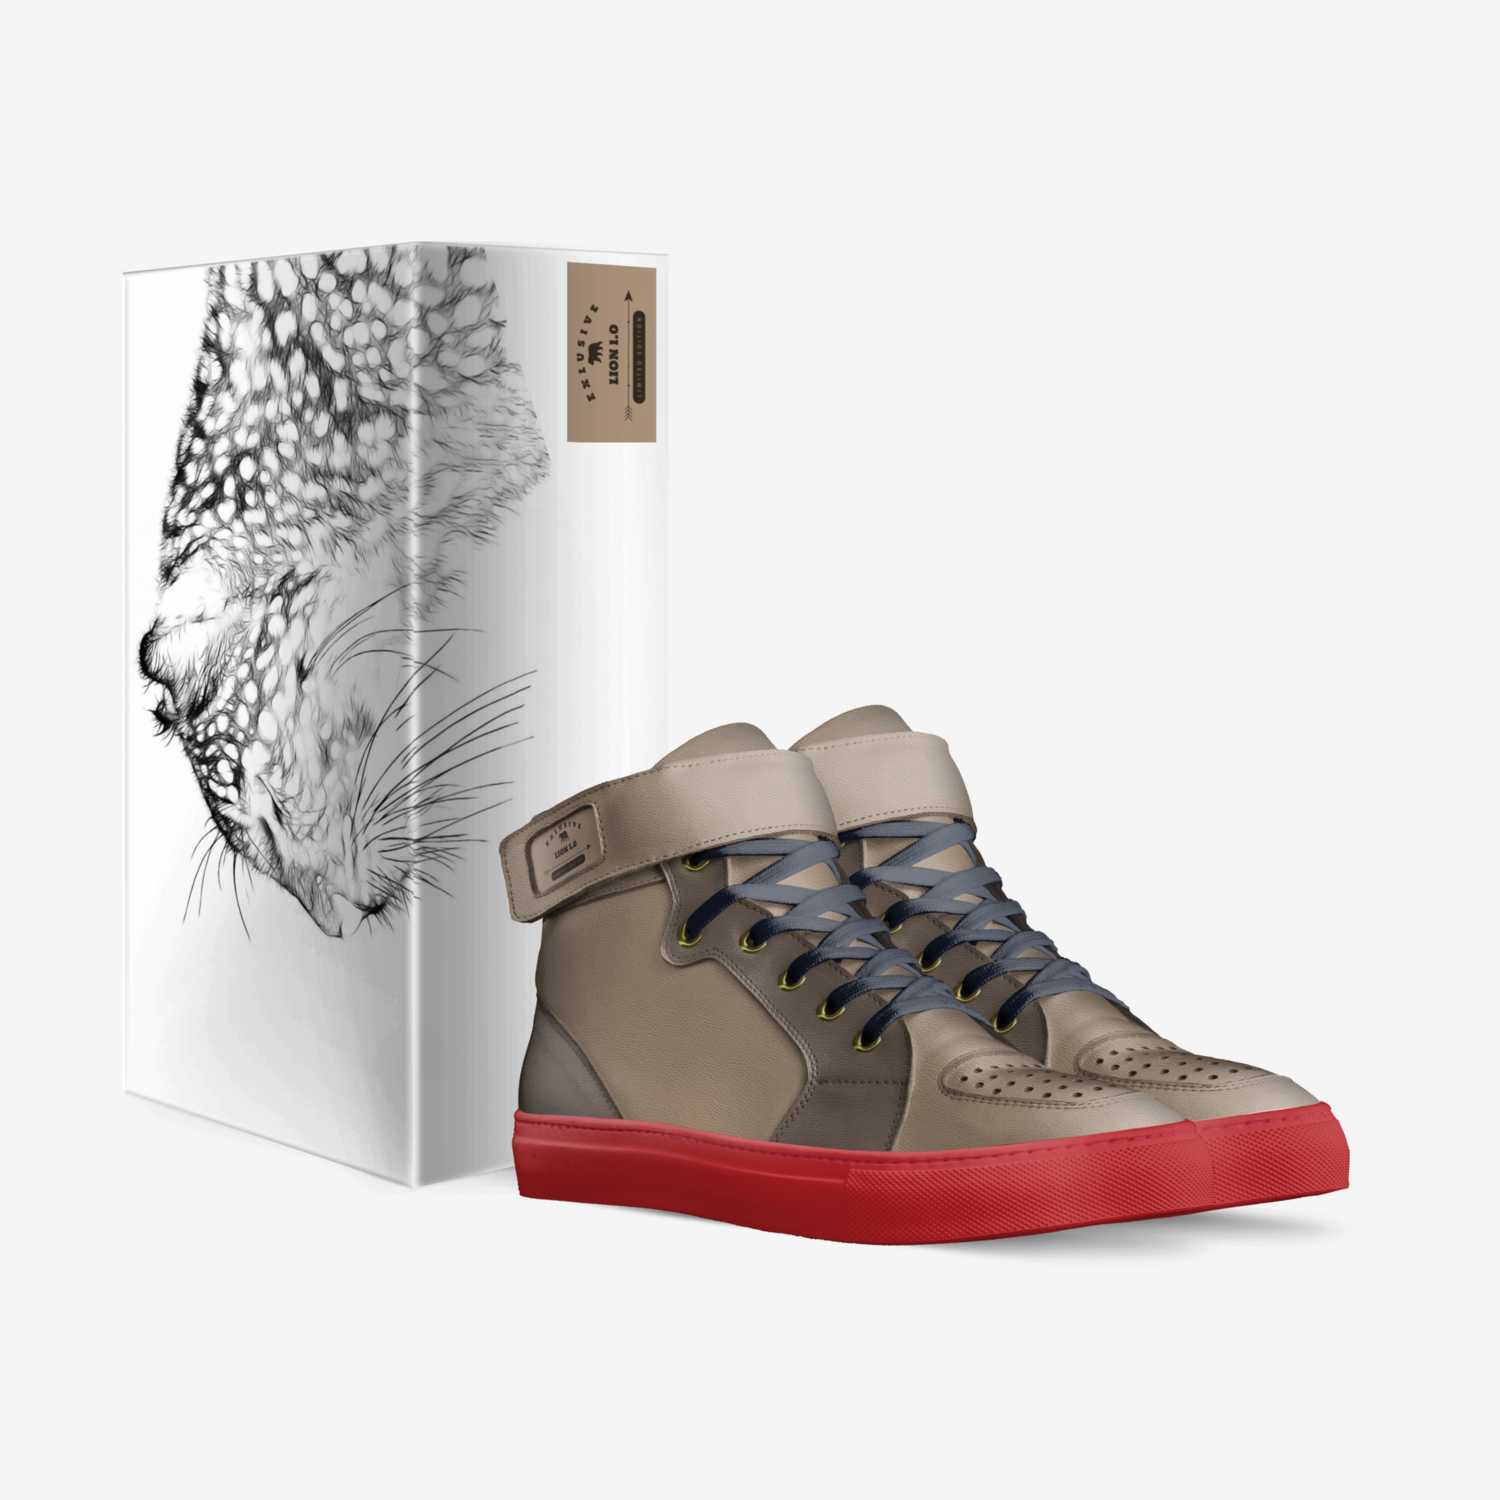 Lion 1.0 custom made in Italy shoes by Nic | Box view